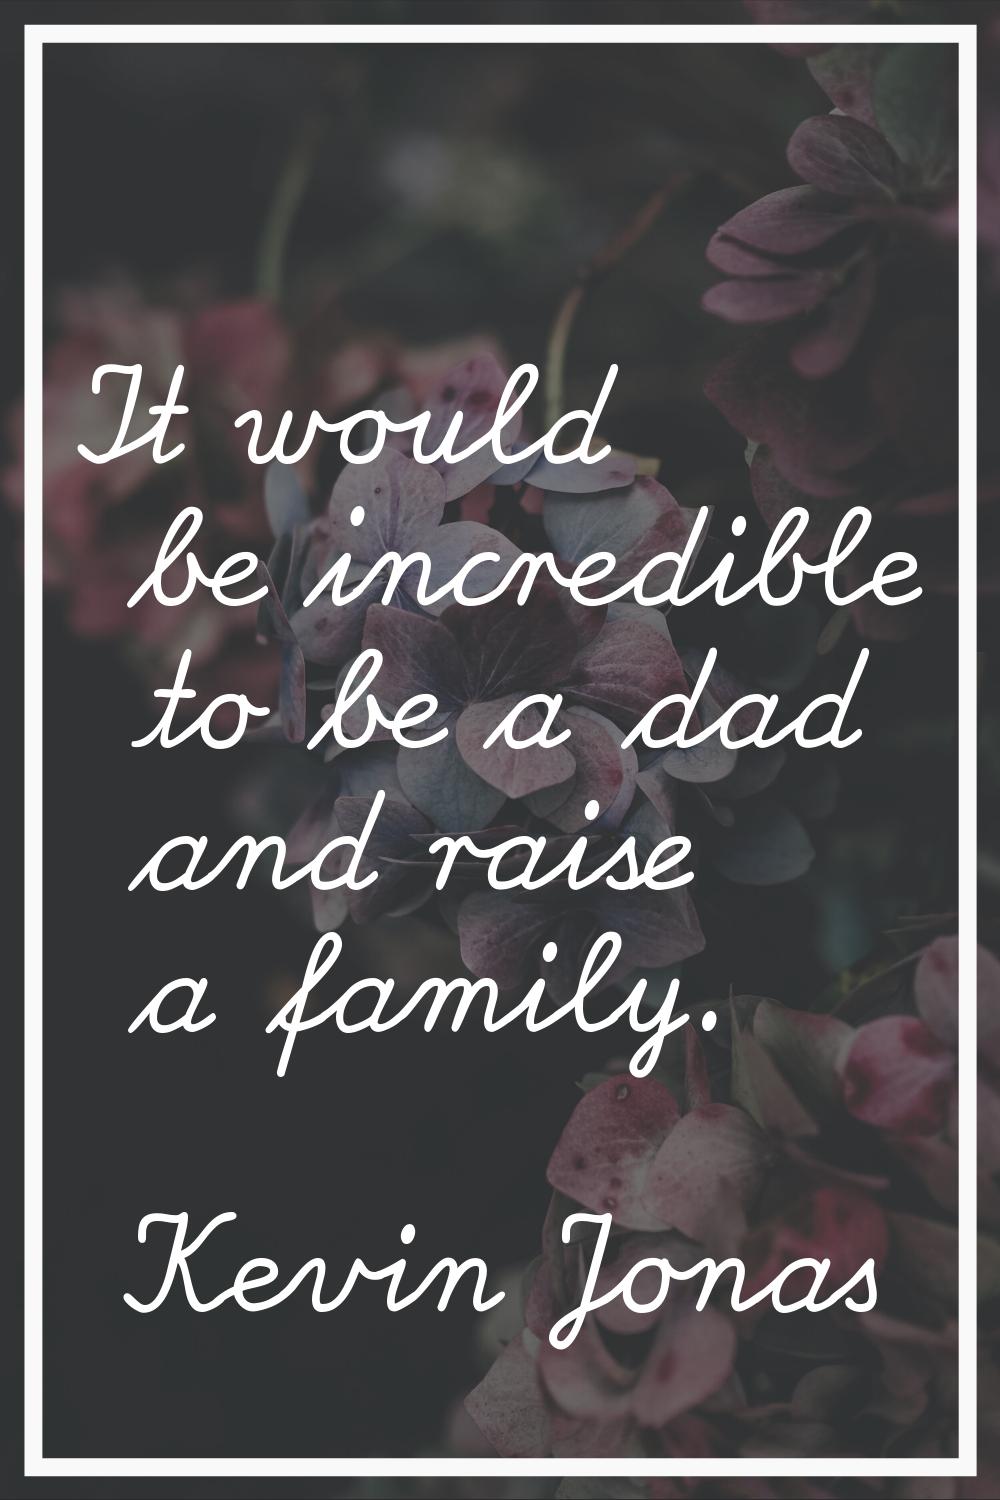 It would be incredible to be a dad and raise a family.